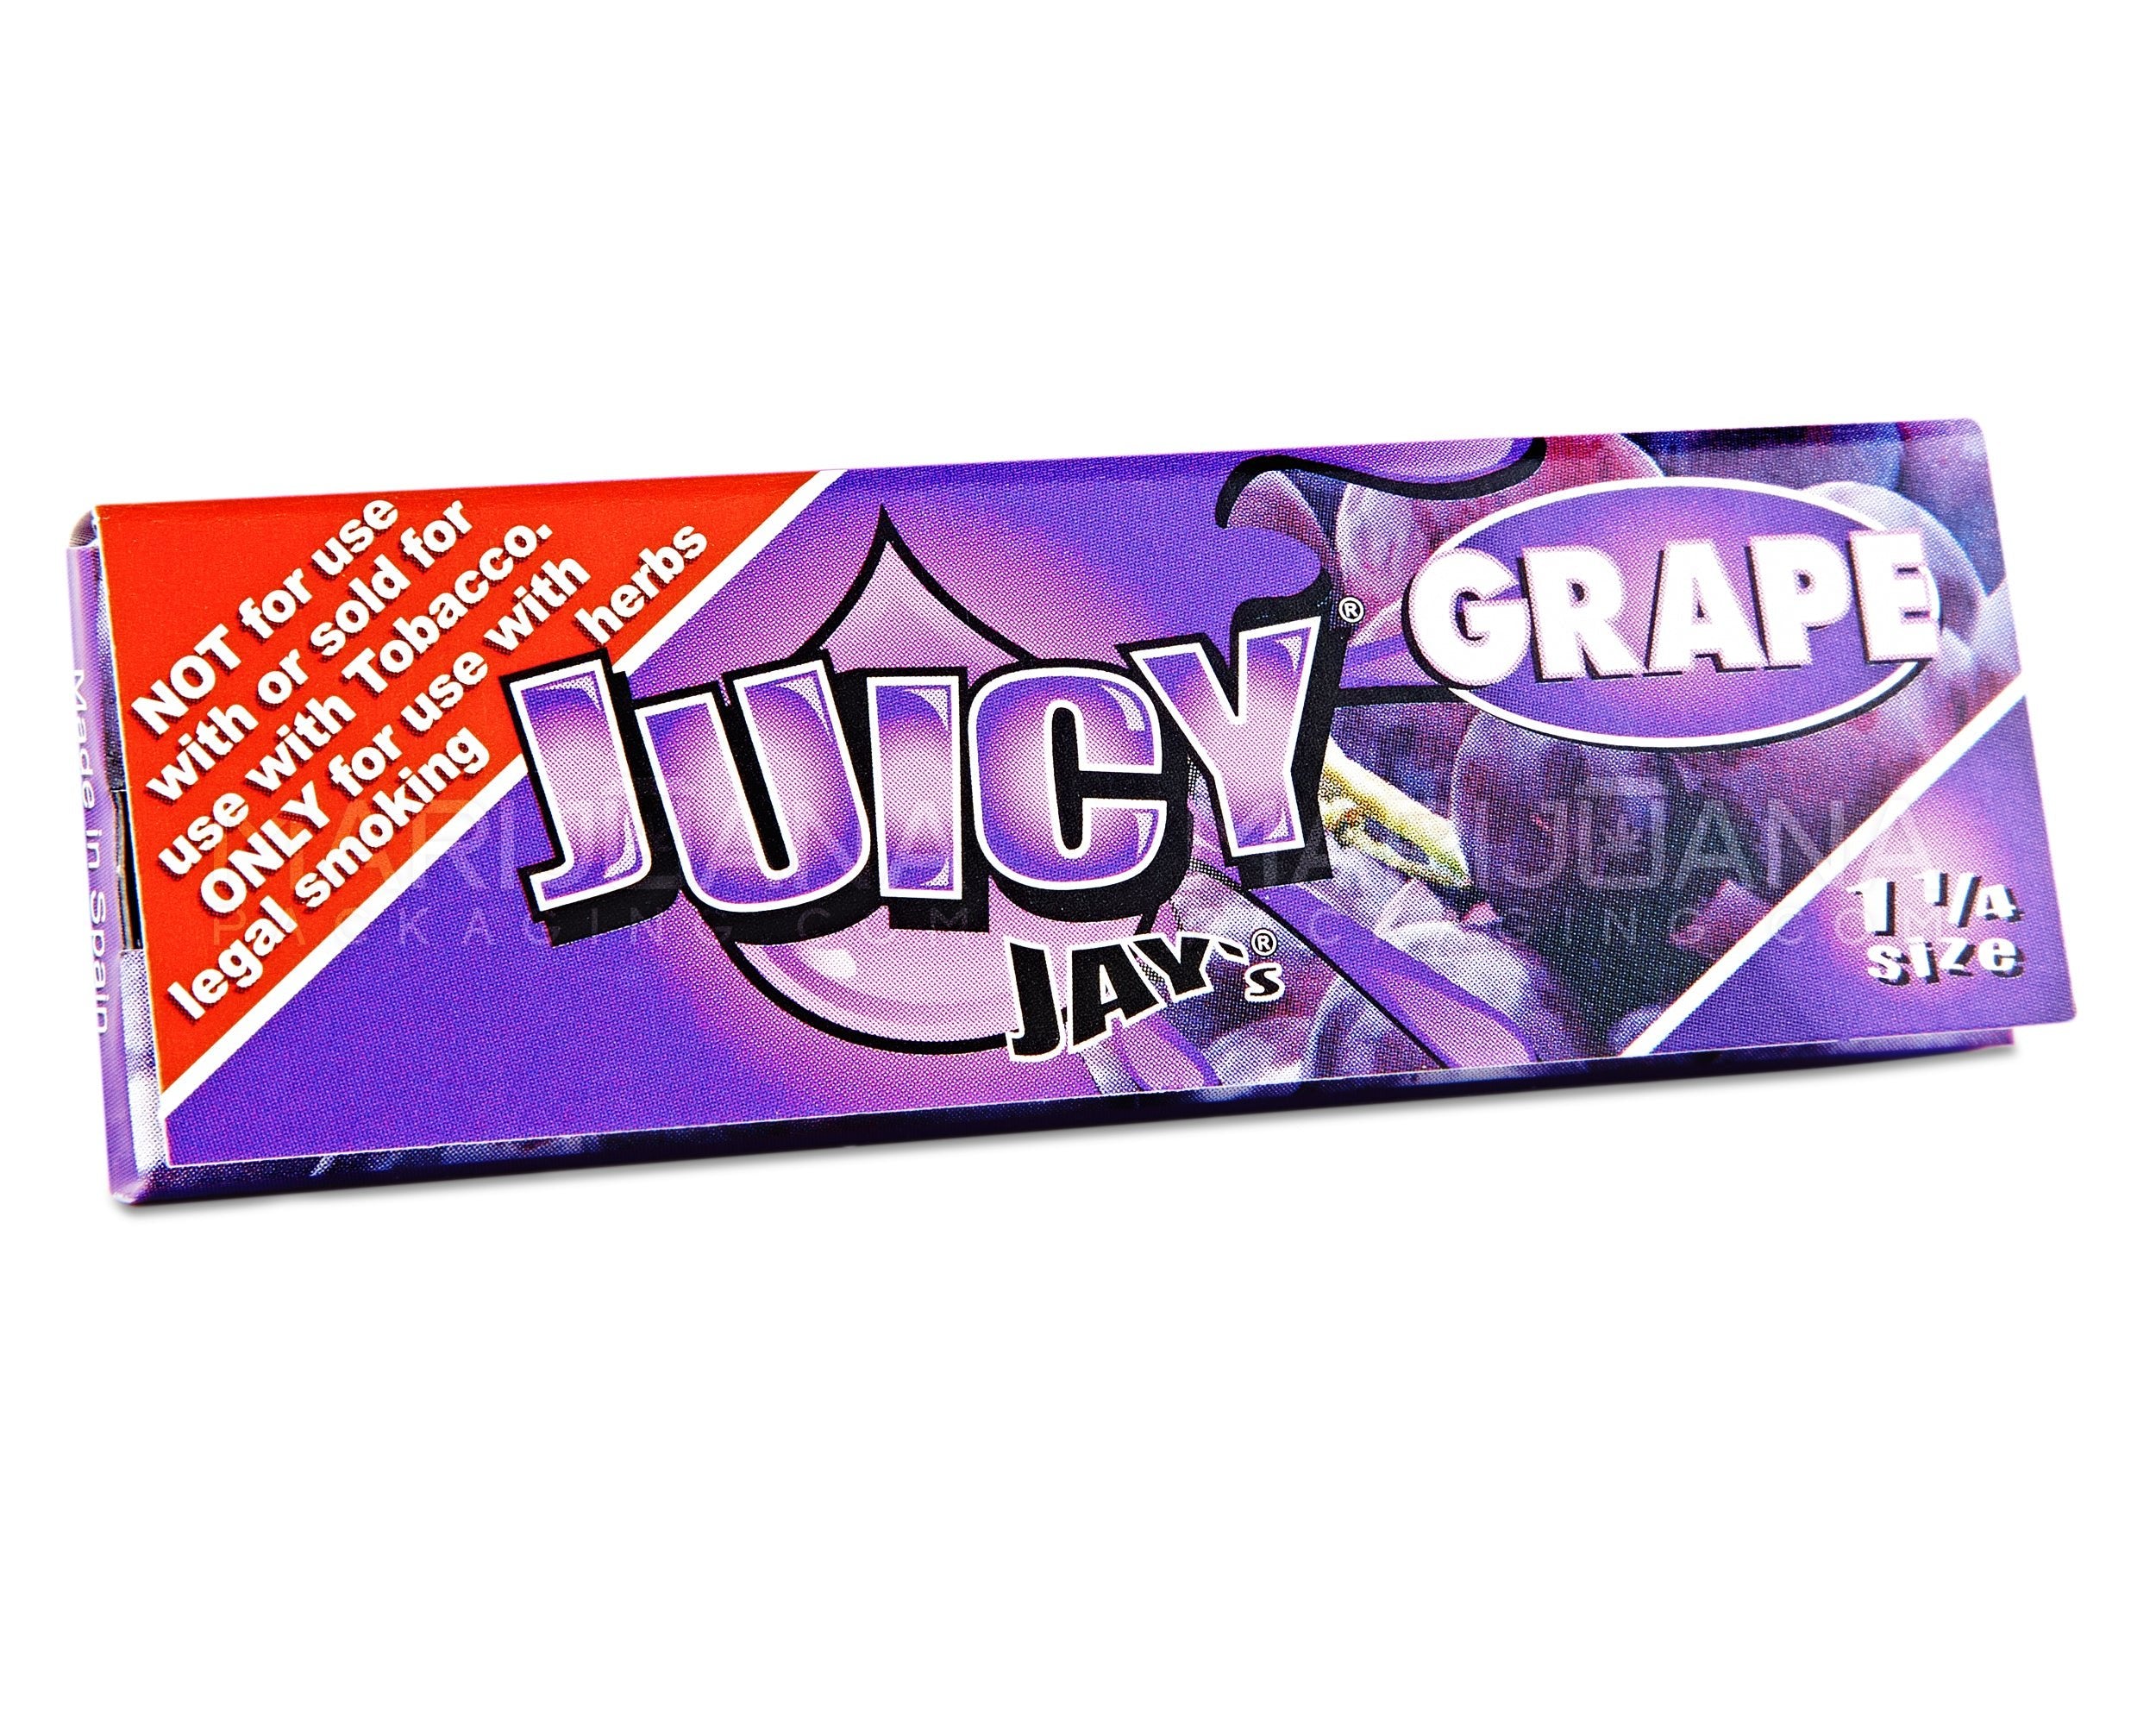 JUICY JAY'S | 'Retail Display' 1 1/4 Size Hemp Rolling Papers | 76mm - Grape - 24 Count - 2